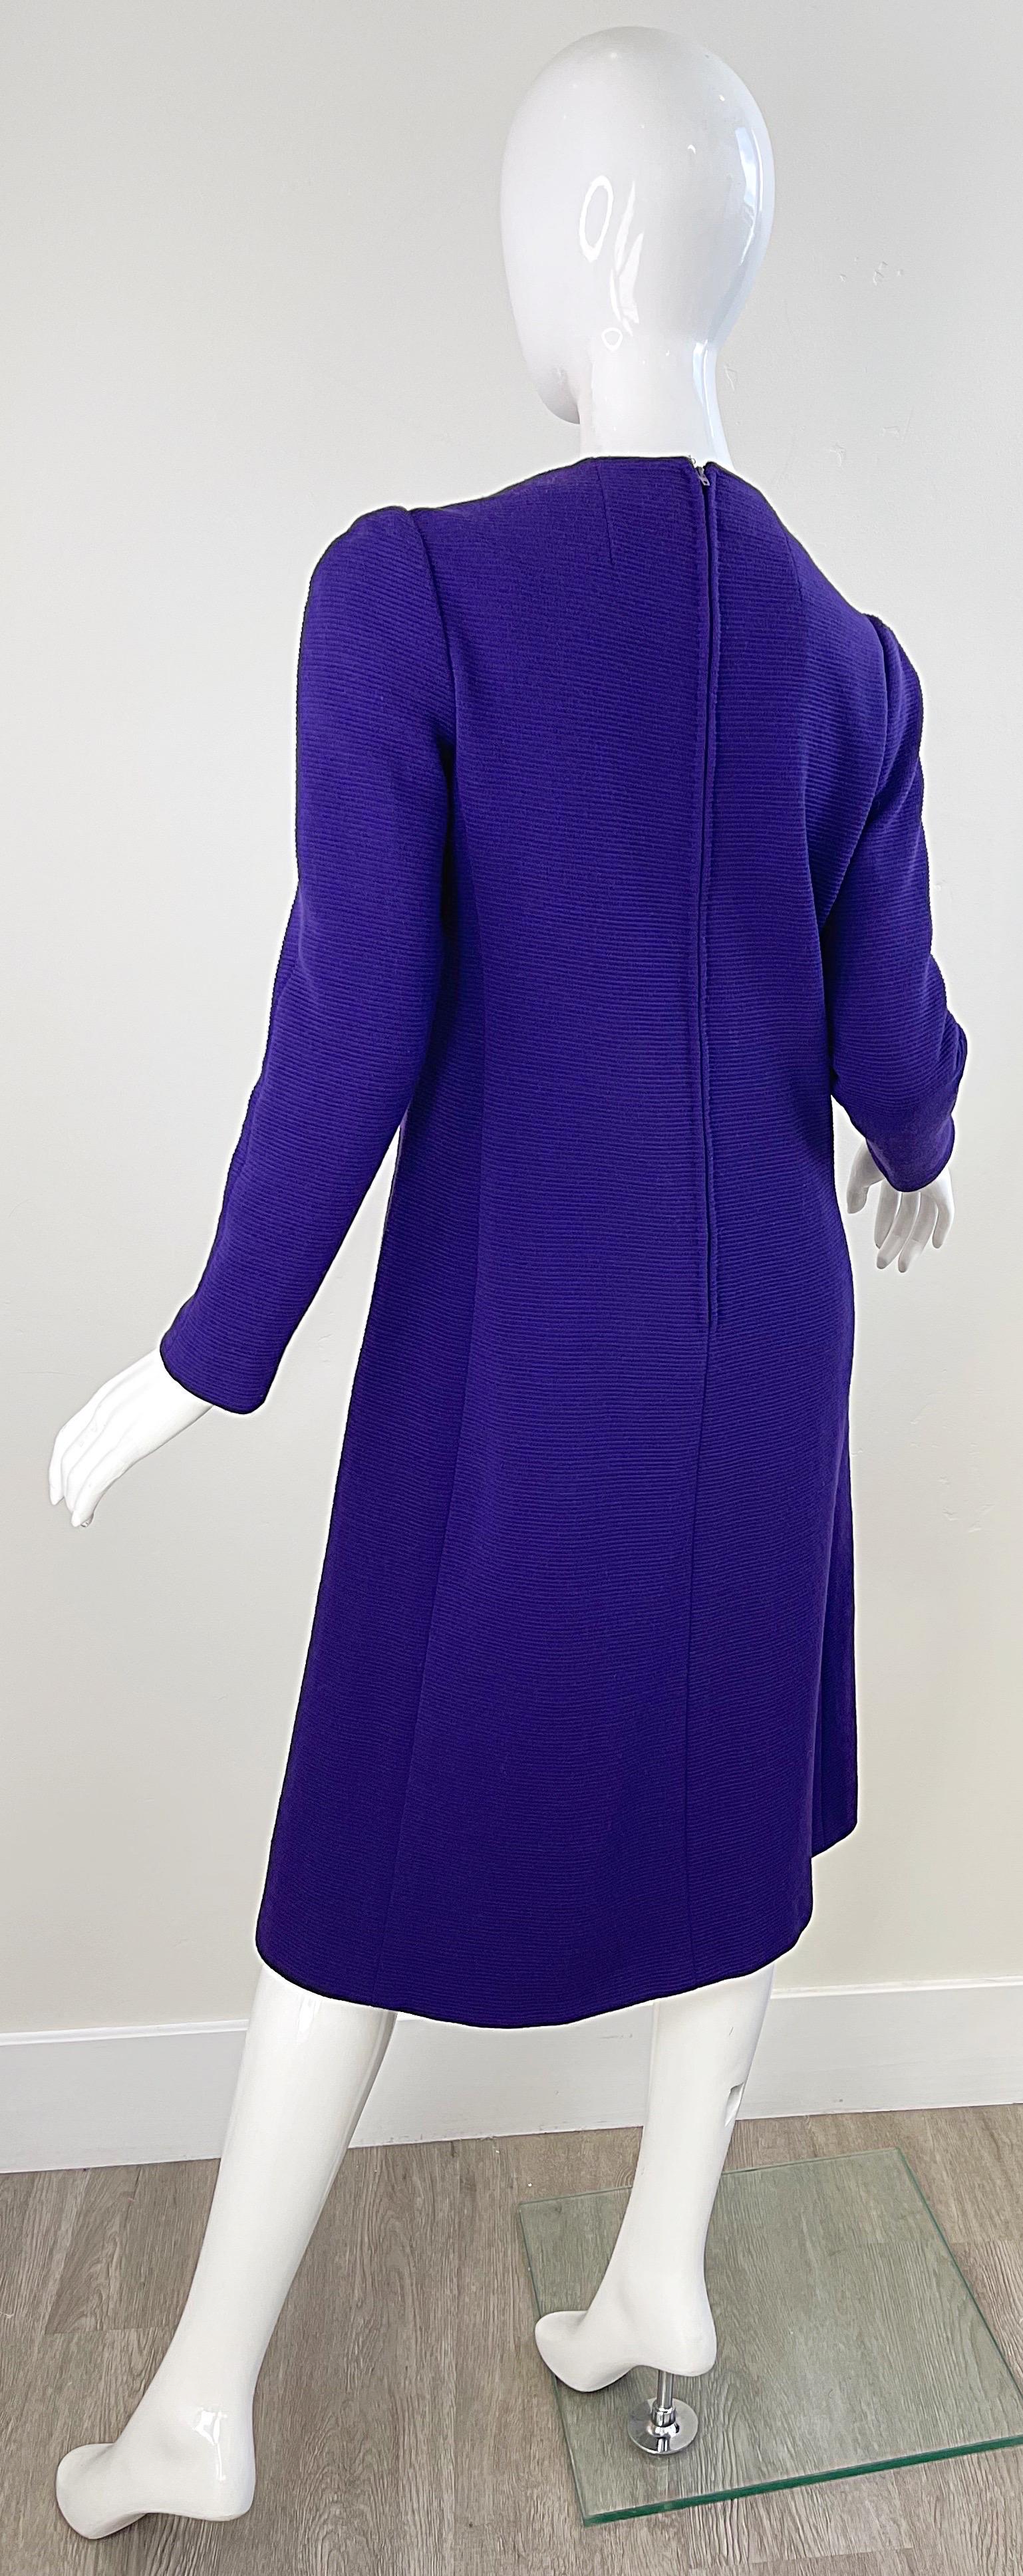 1970s Halston Purple Wool Long Sleeve Vintage Chic 70s Tailored Dress For Sale 9